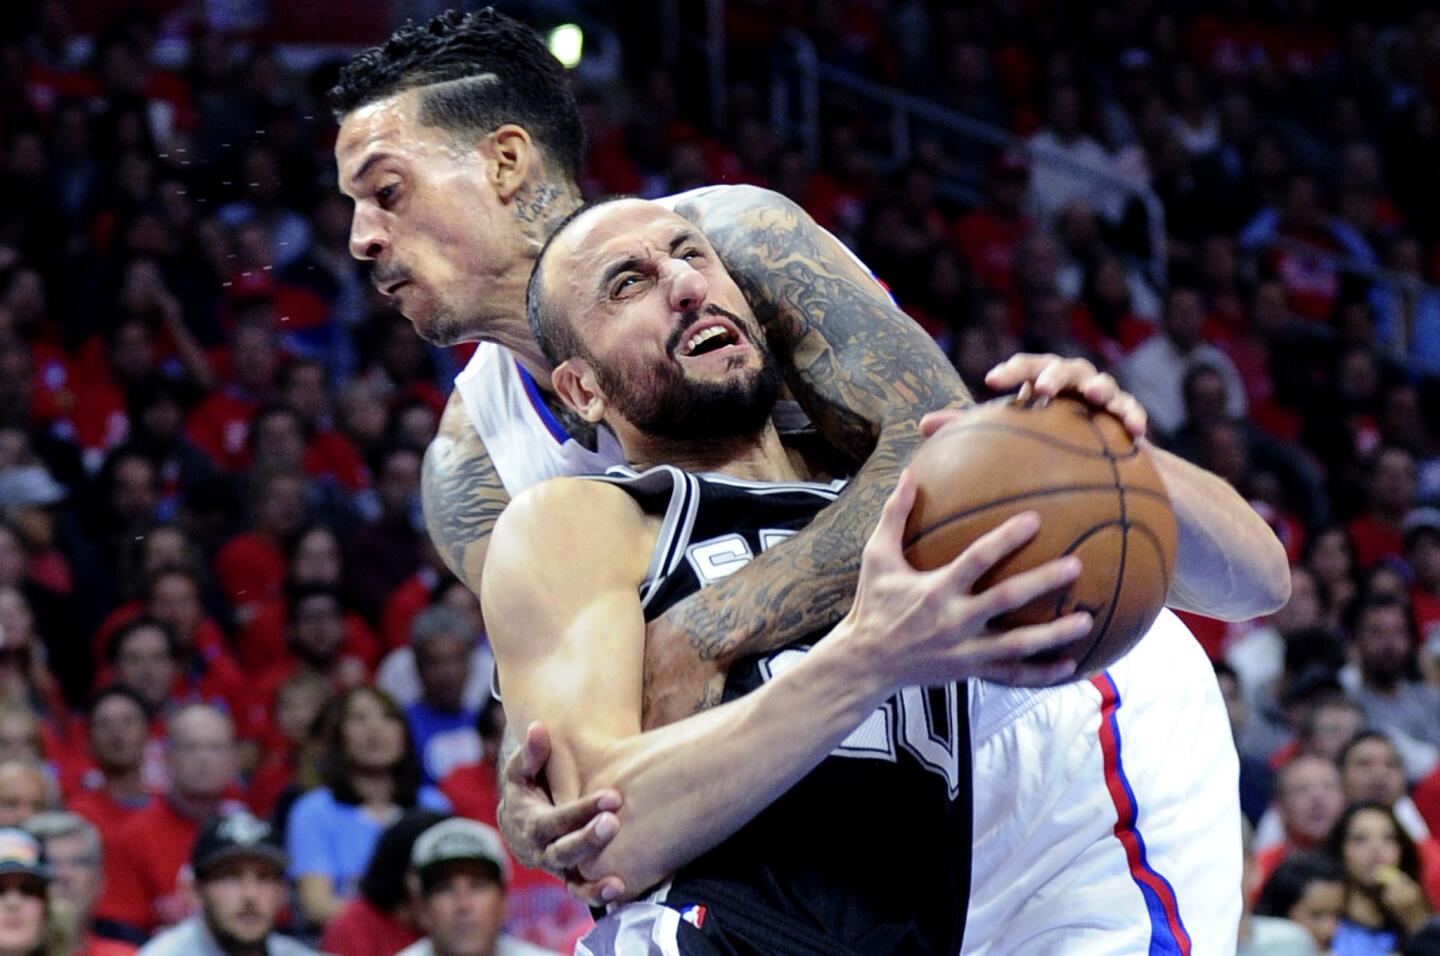 Clippers forward Matt Barnes fouls Spurs guard Manu Ginobili as Ginobili drives to the basket in the first half.